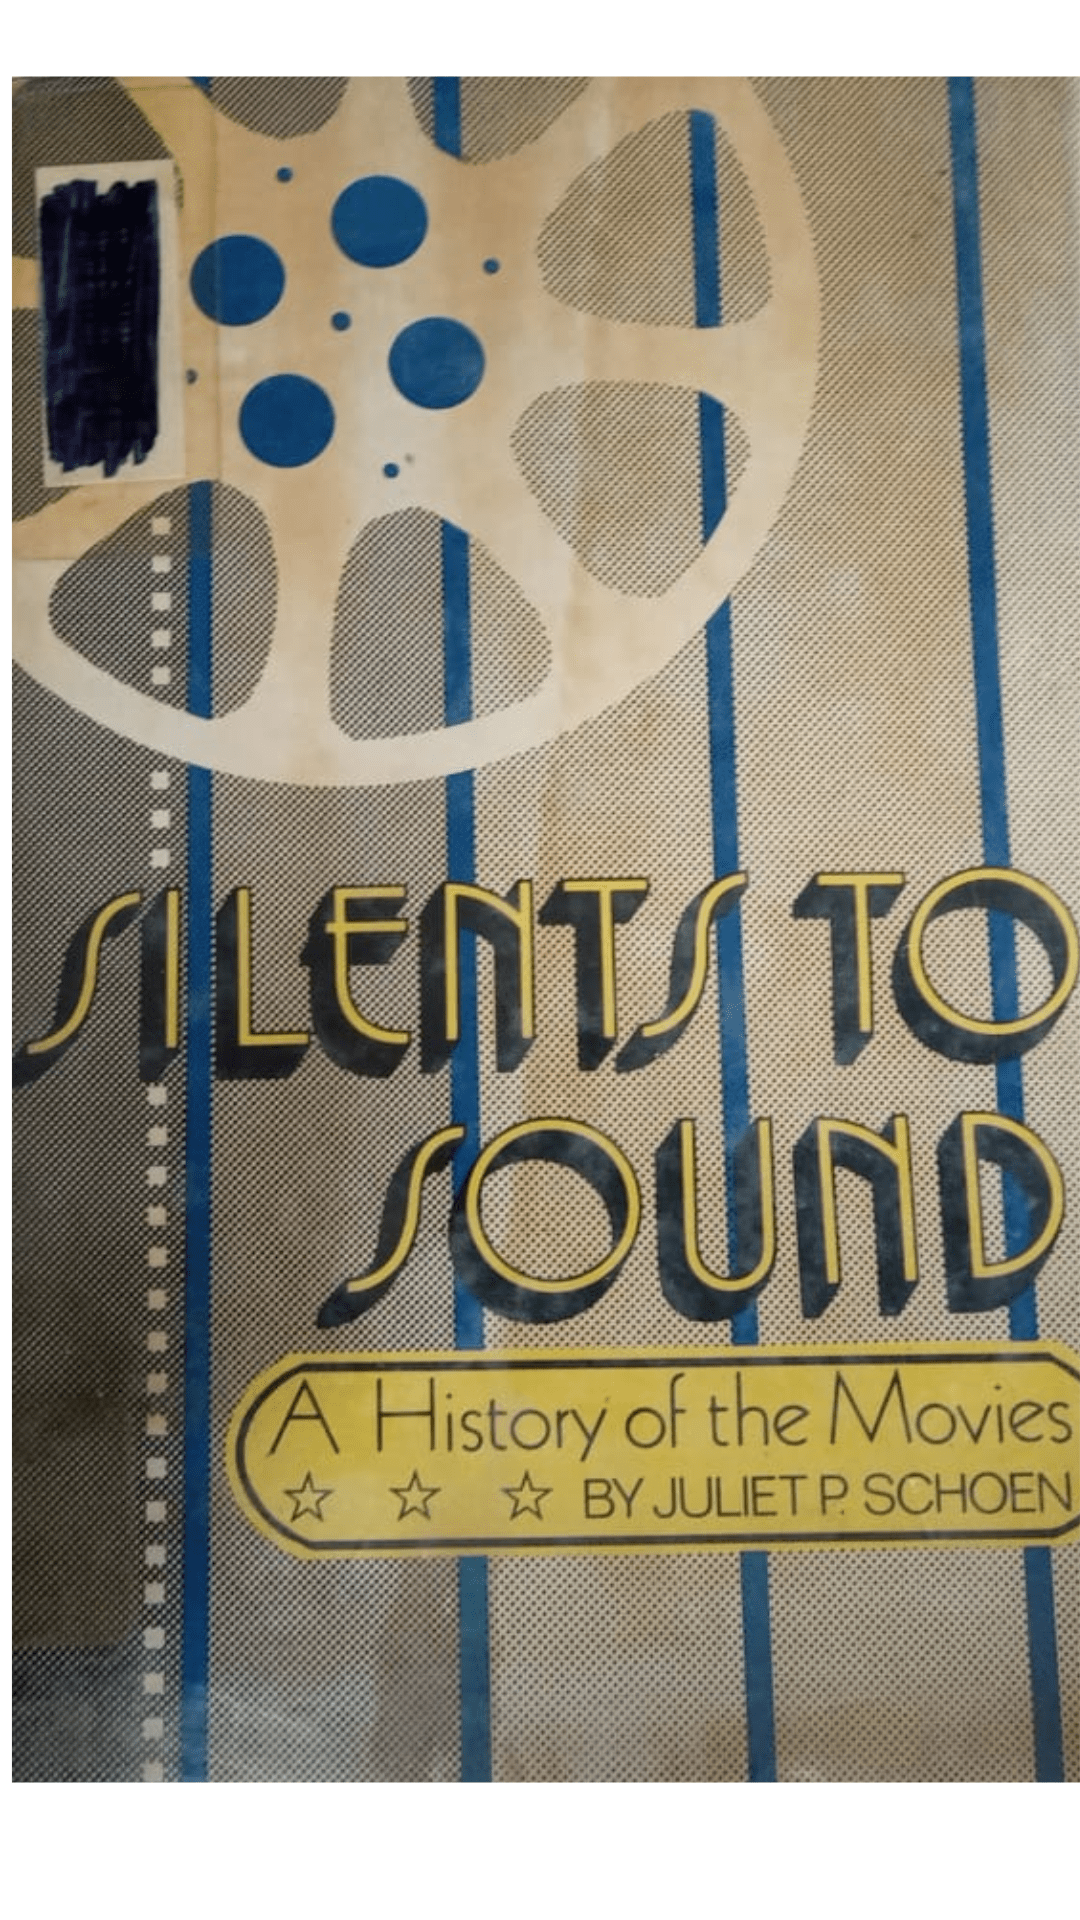 Silents to sound: A history of the movies